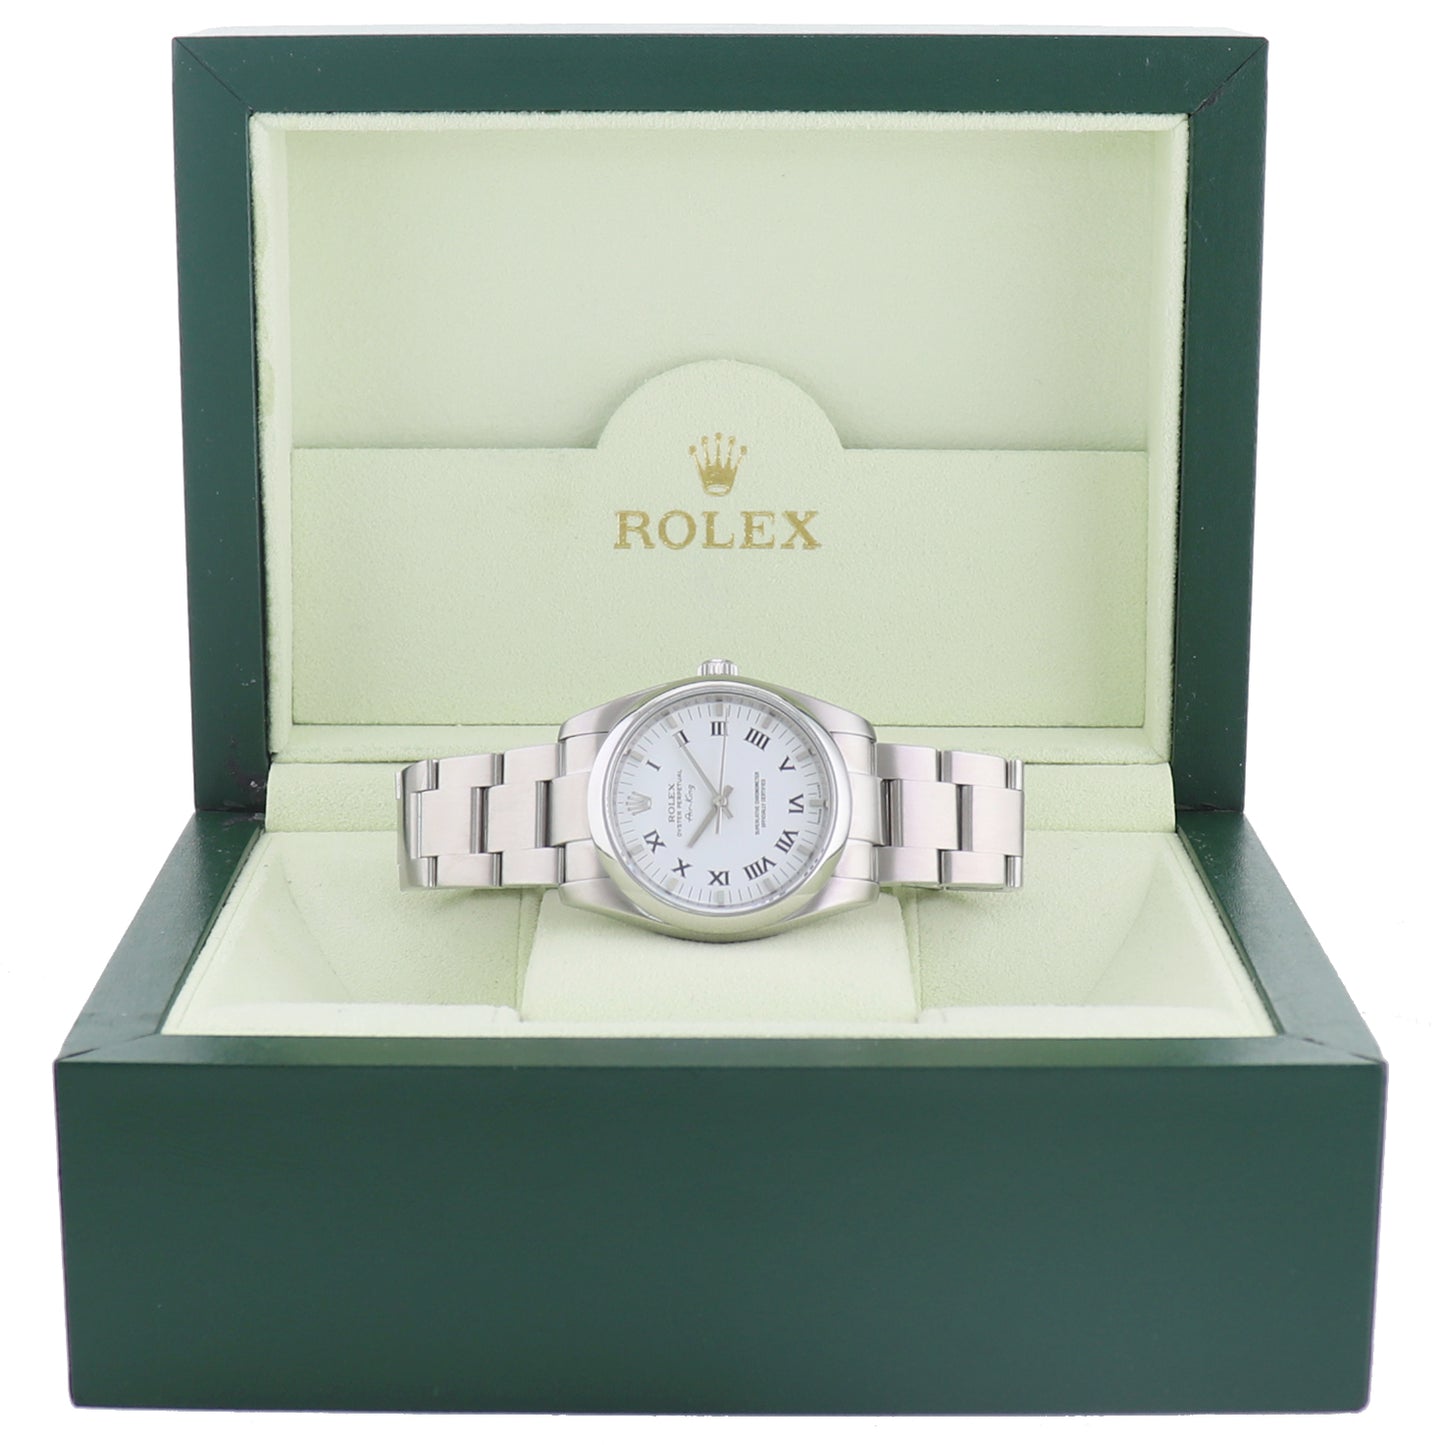 MINT Rolex Oyster Perpetual White Roman Oyster 114200 Watch with Box